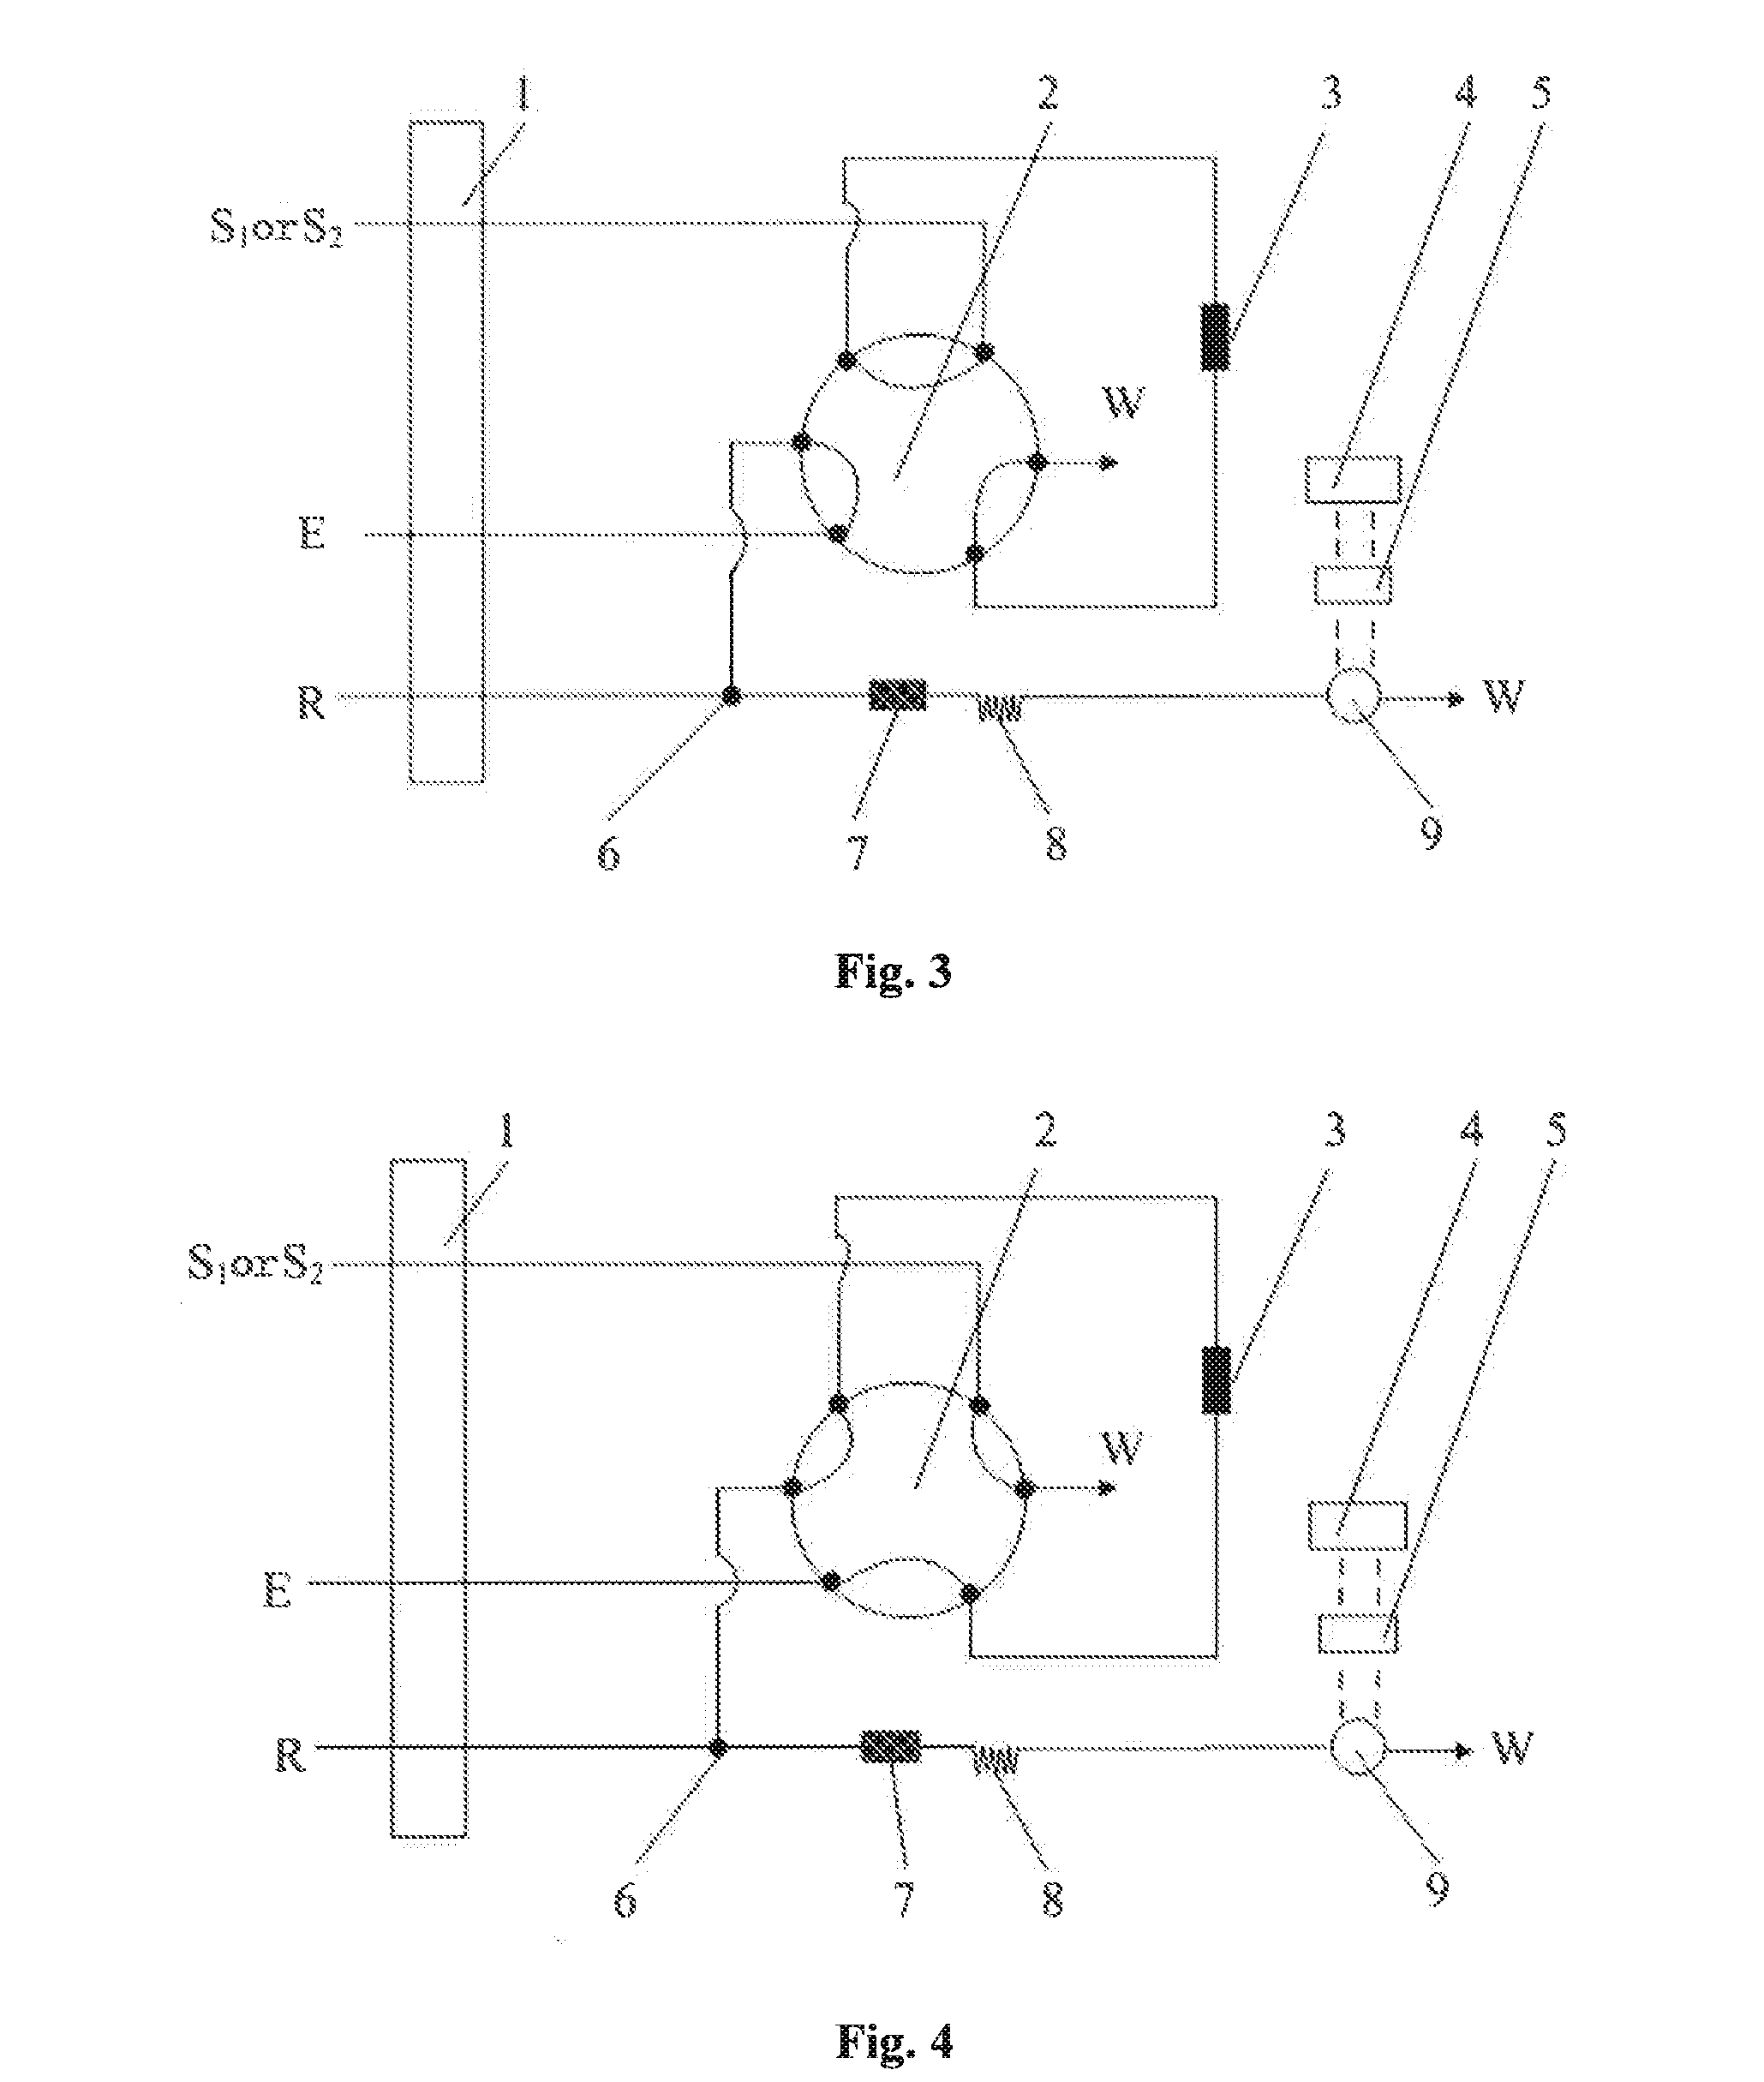 Method and apparatus for simultaneous online assay of nitrites and nitrates in water samples